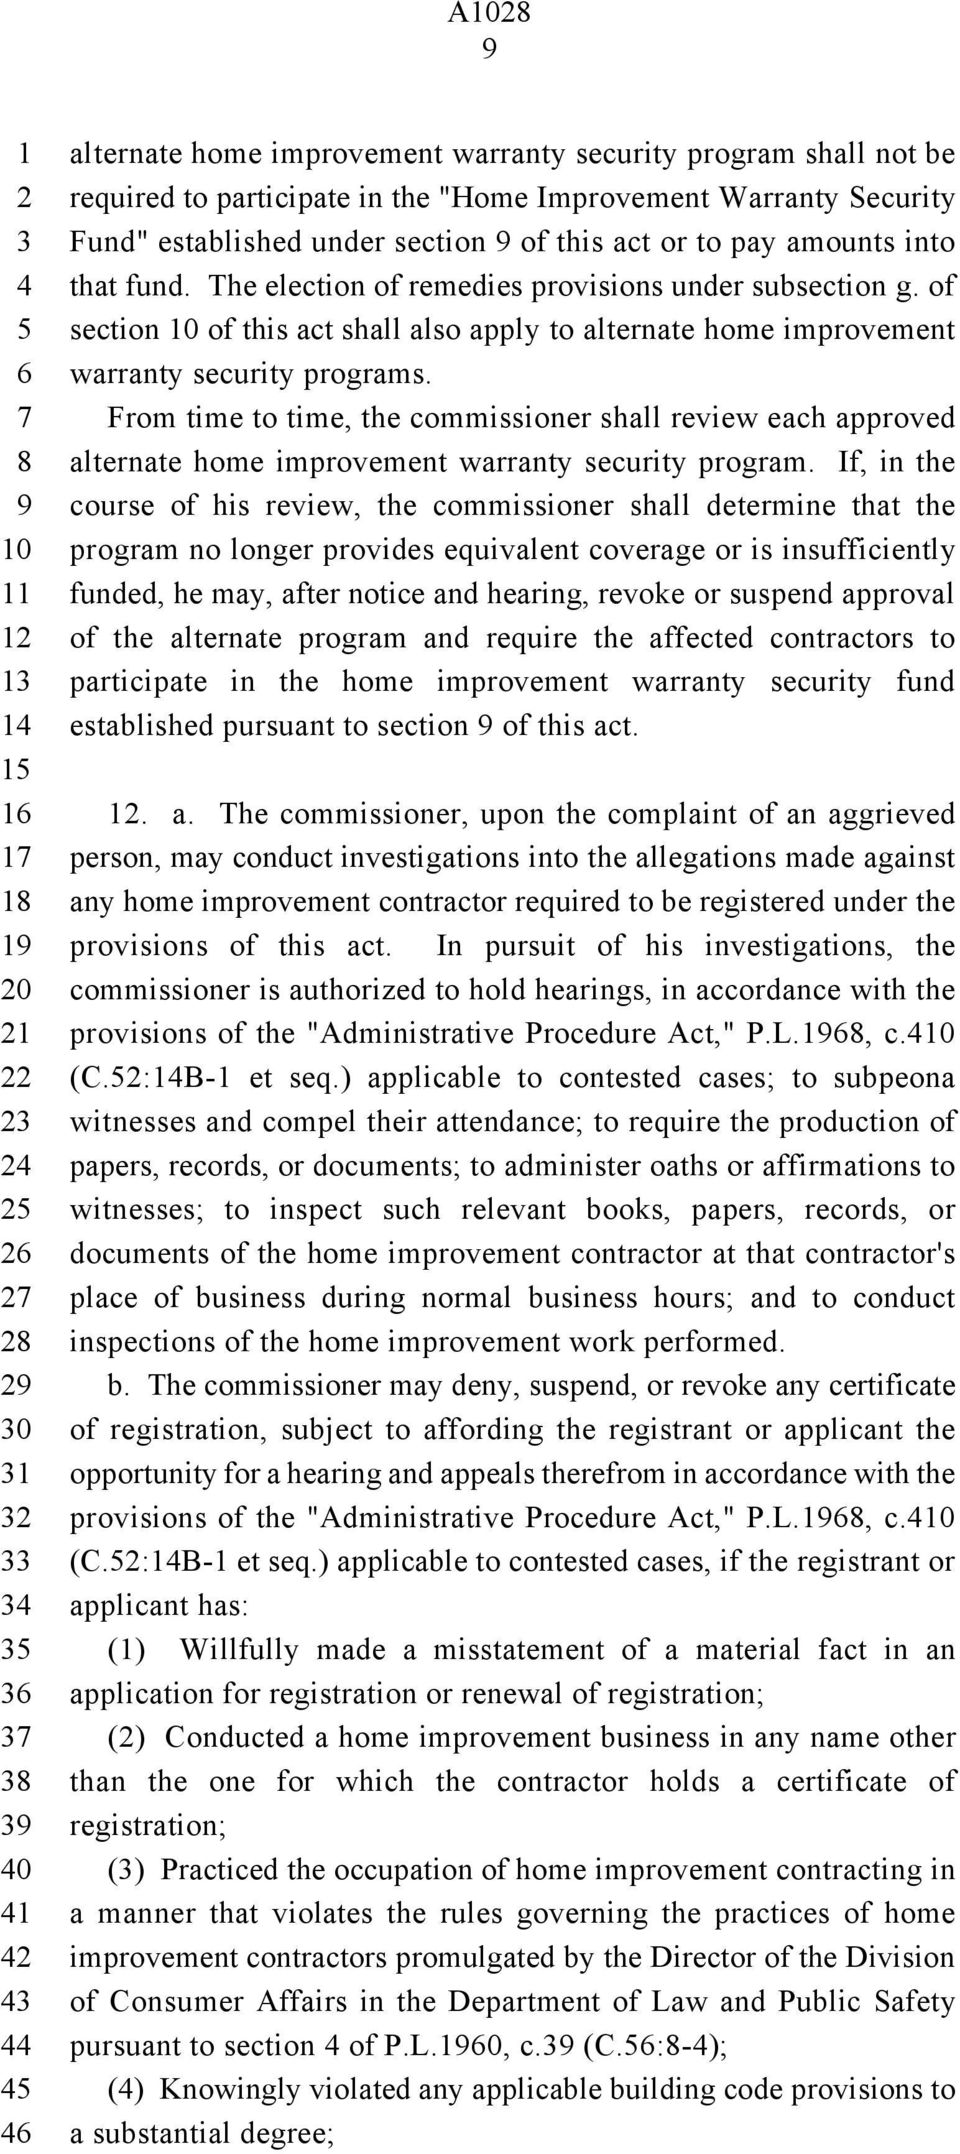 From time to time, the commissioner shall review each approved alternate home improvement warranty security program.